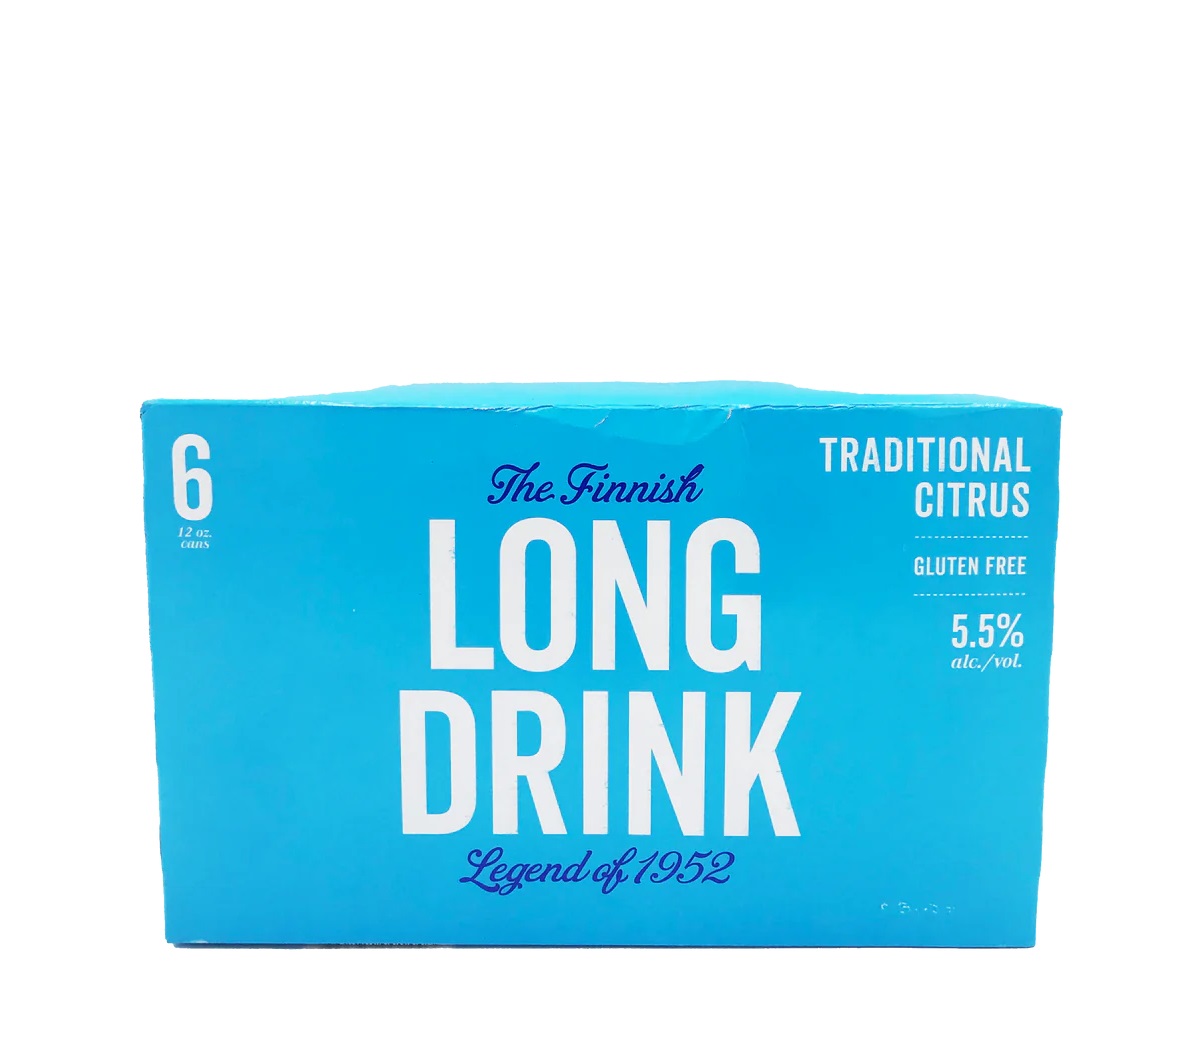 19-long-drink-traditional-nutrition-facts